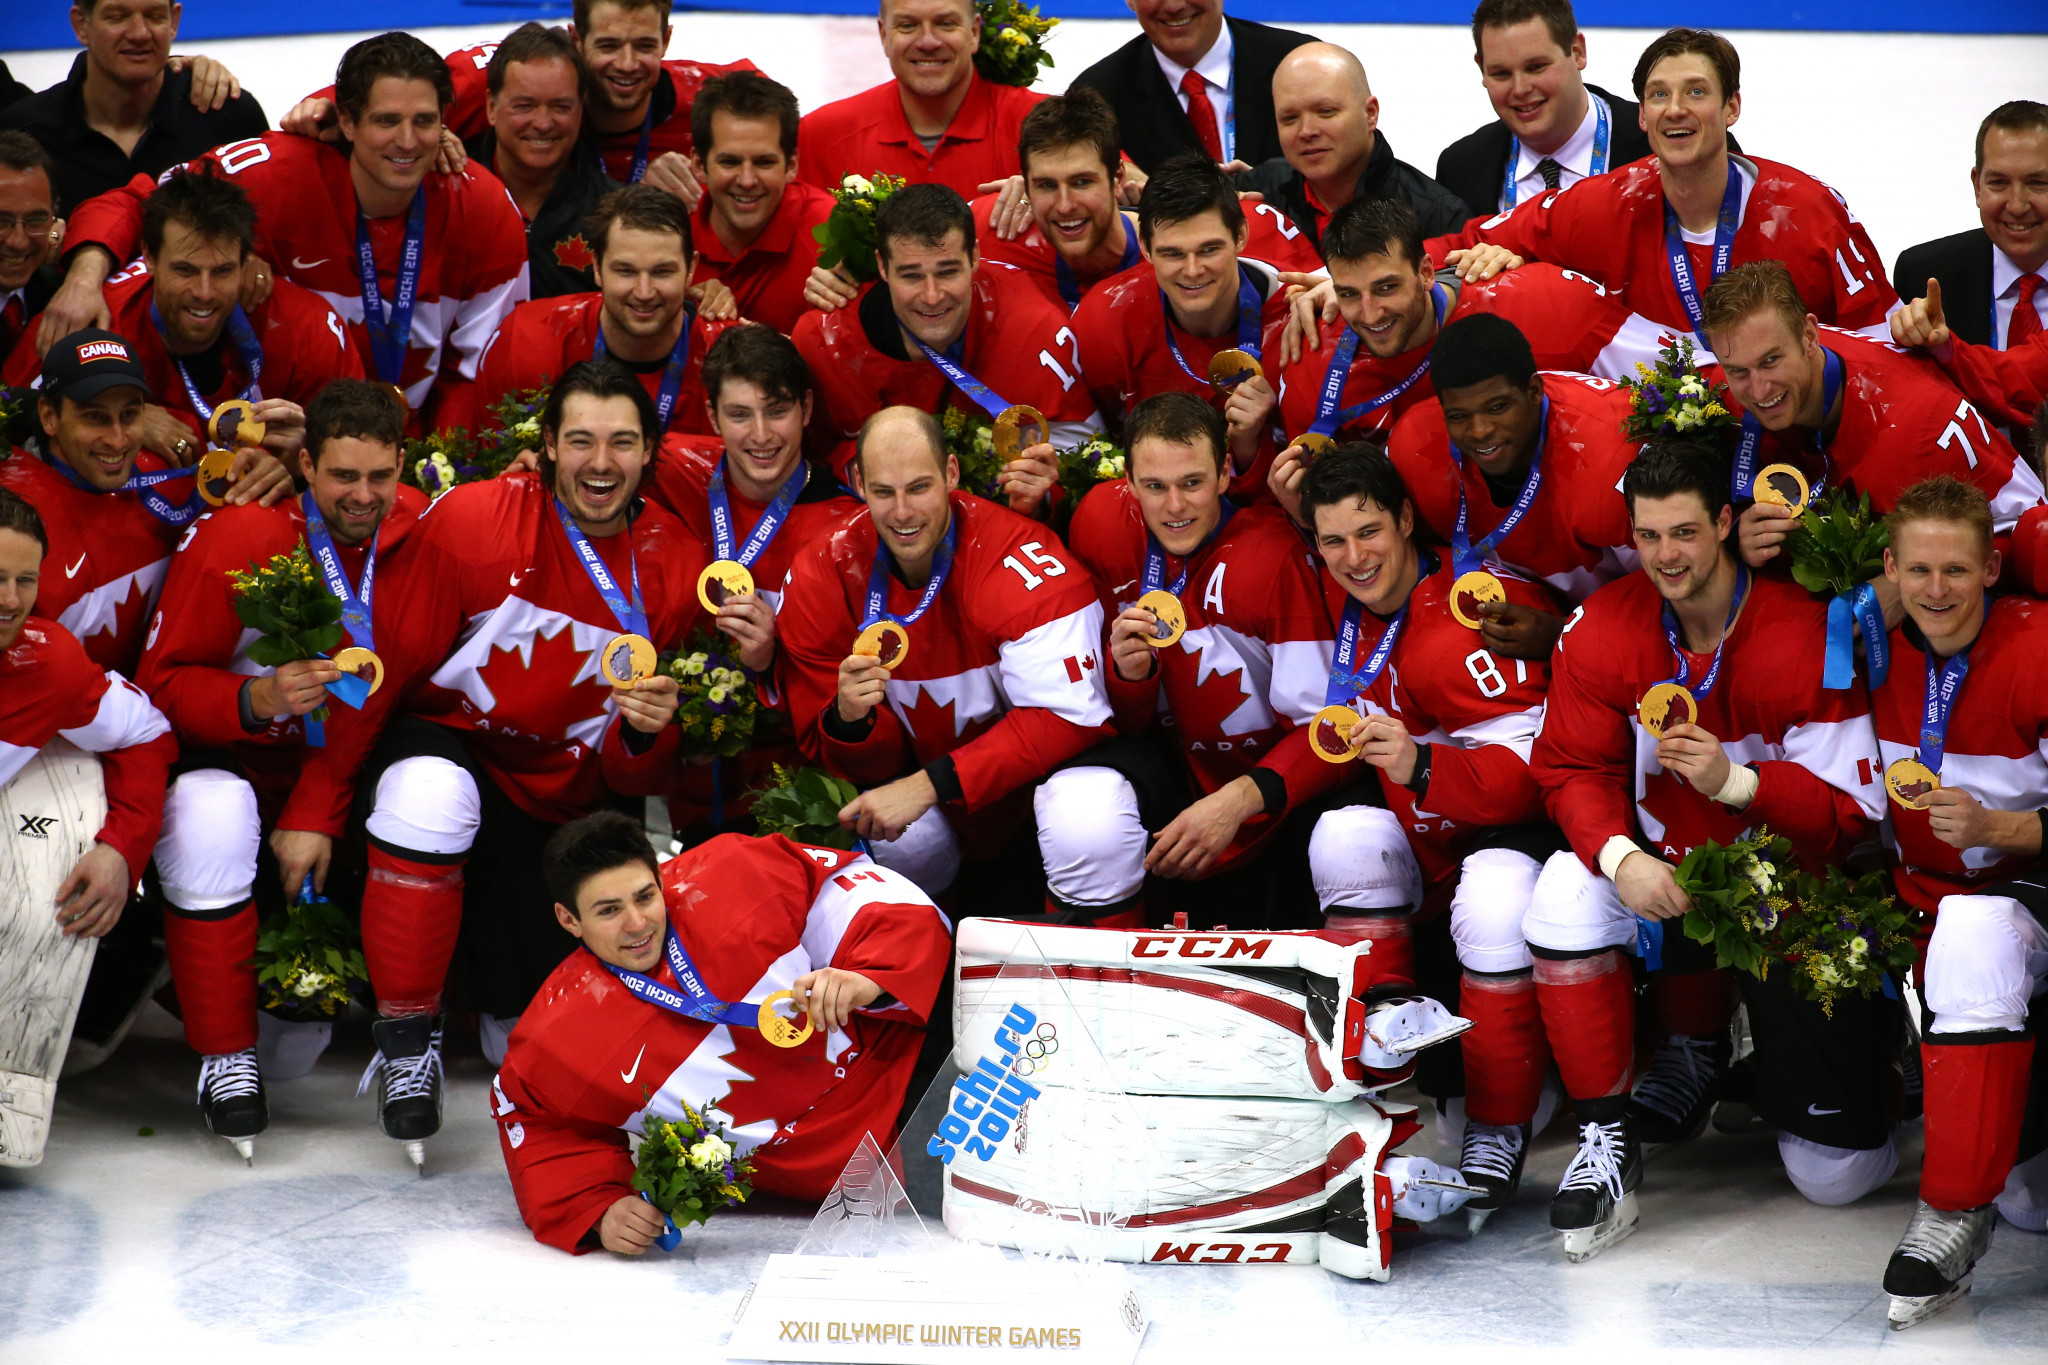 Doug Armstrong was part of the management team when Canada won consecutive Olympic gold medals at Vancouver 2010 and Sochi 2014 ©Getty Images